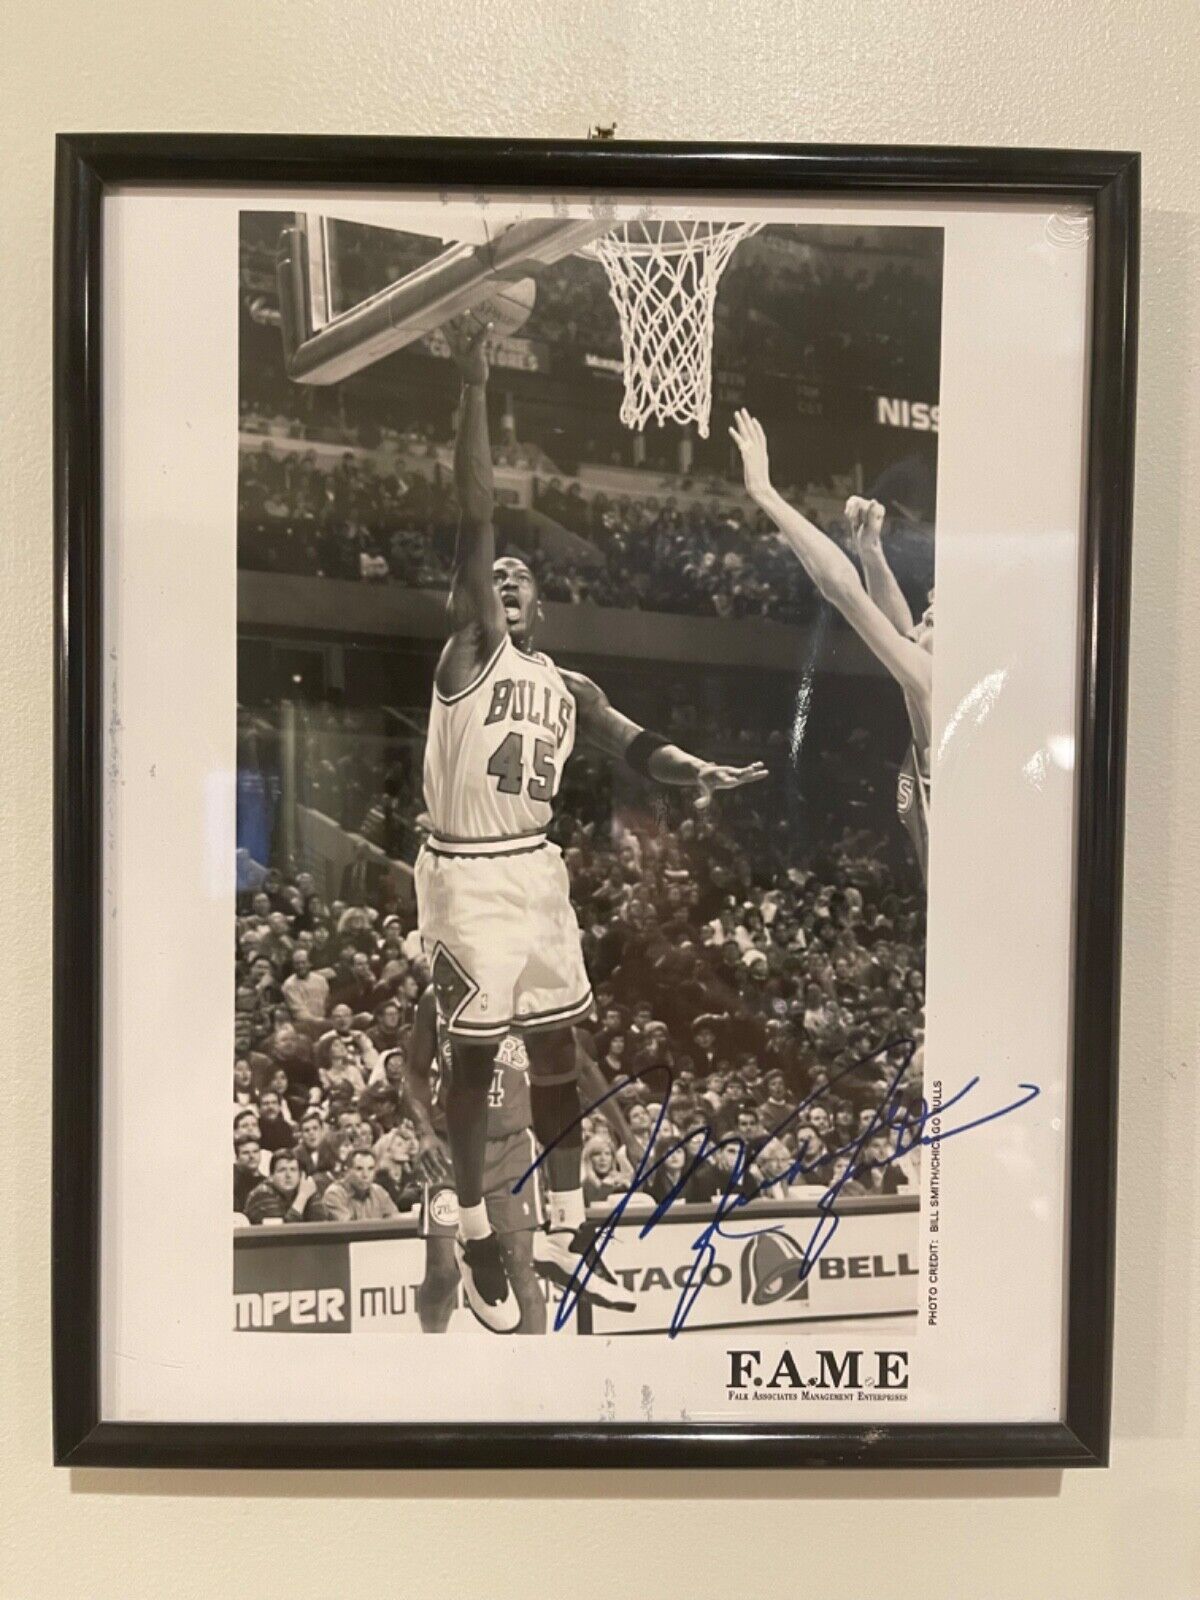 Michael Jordan RARE 1995 framed Promotional Photograph with printed autograph